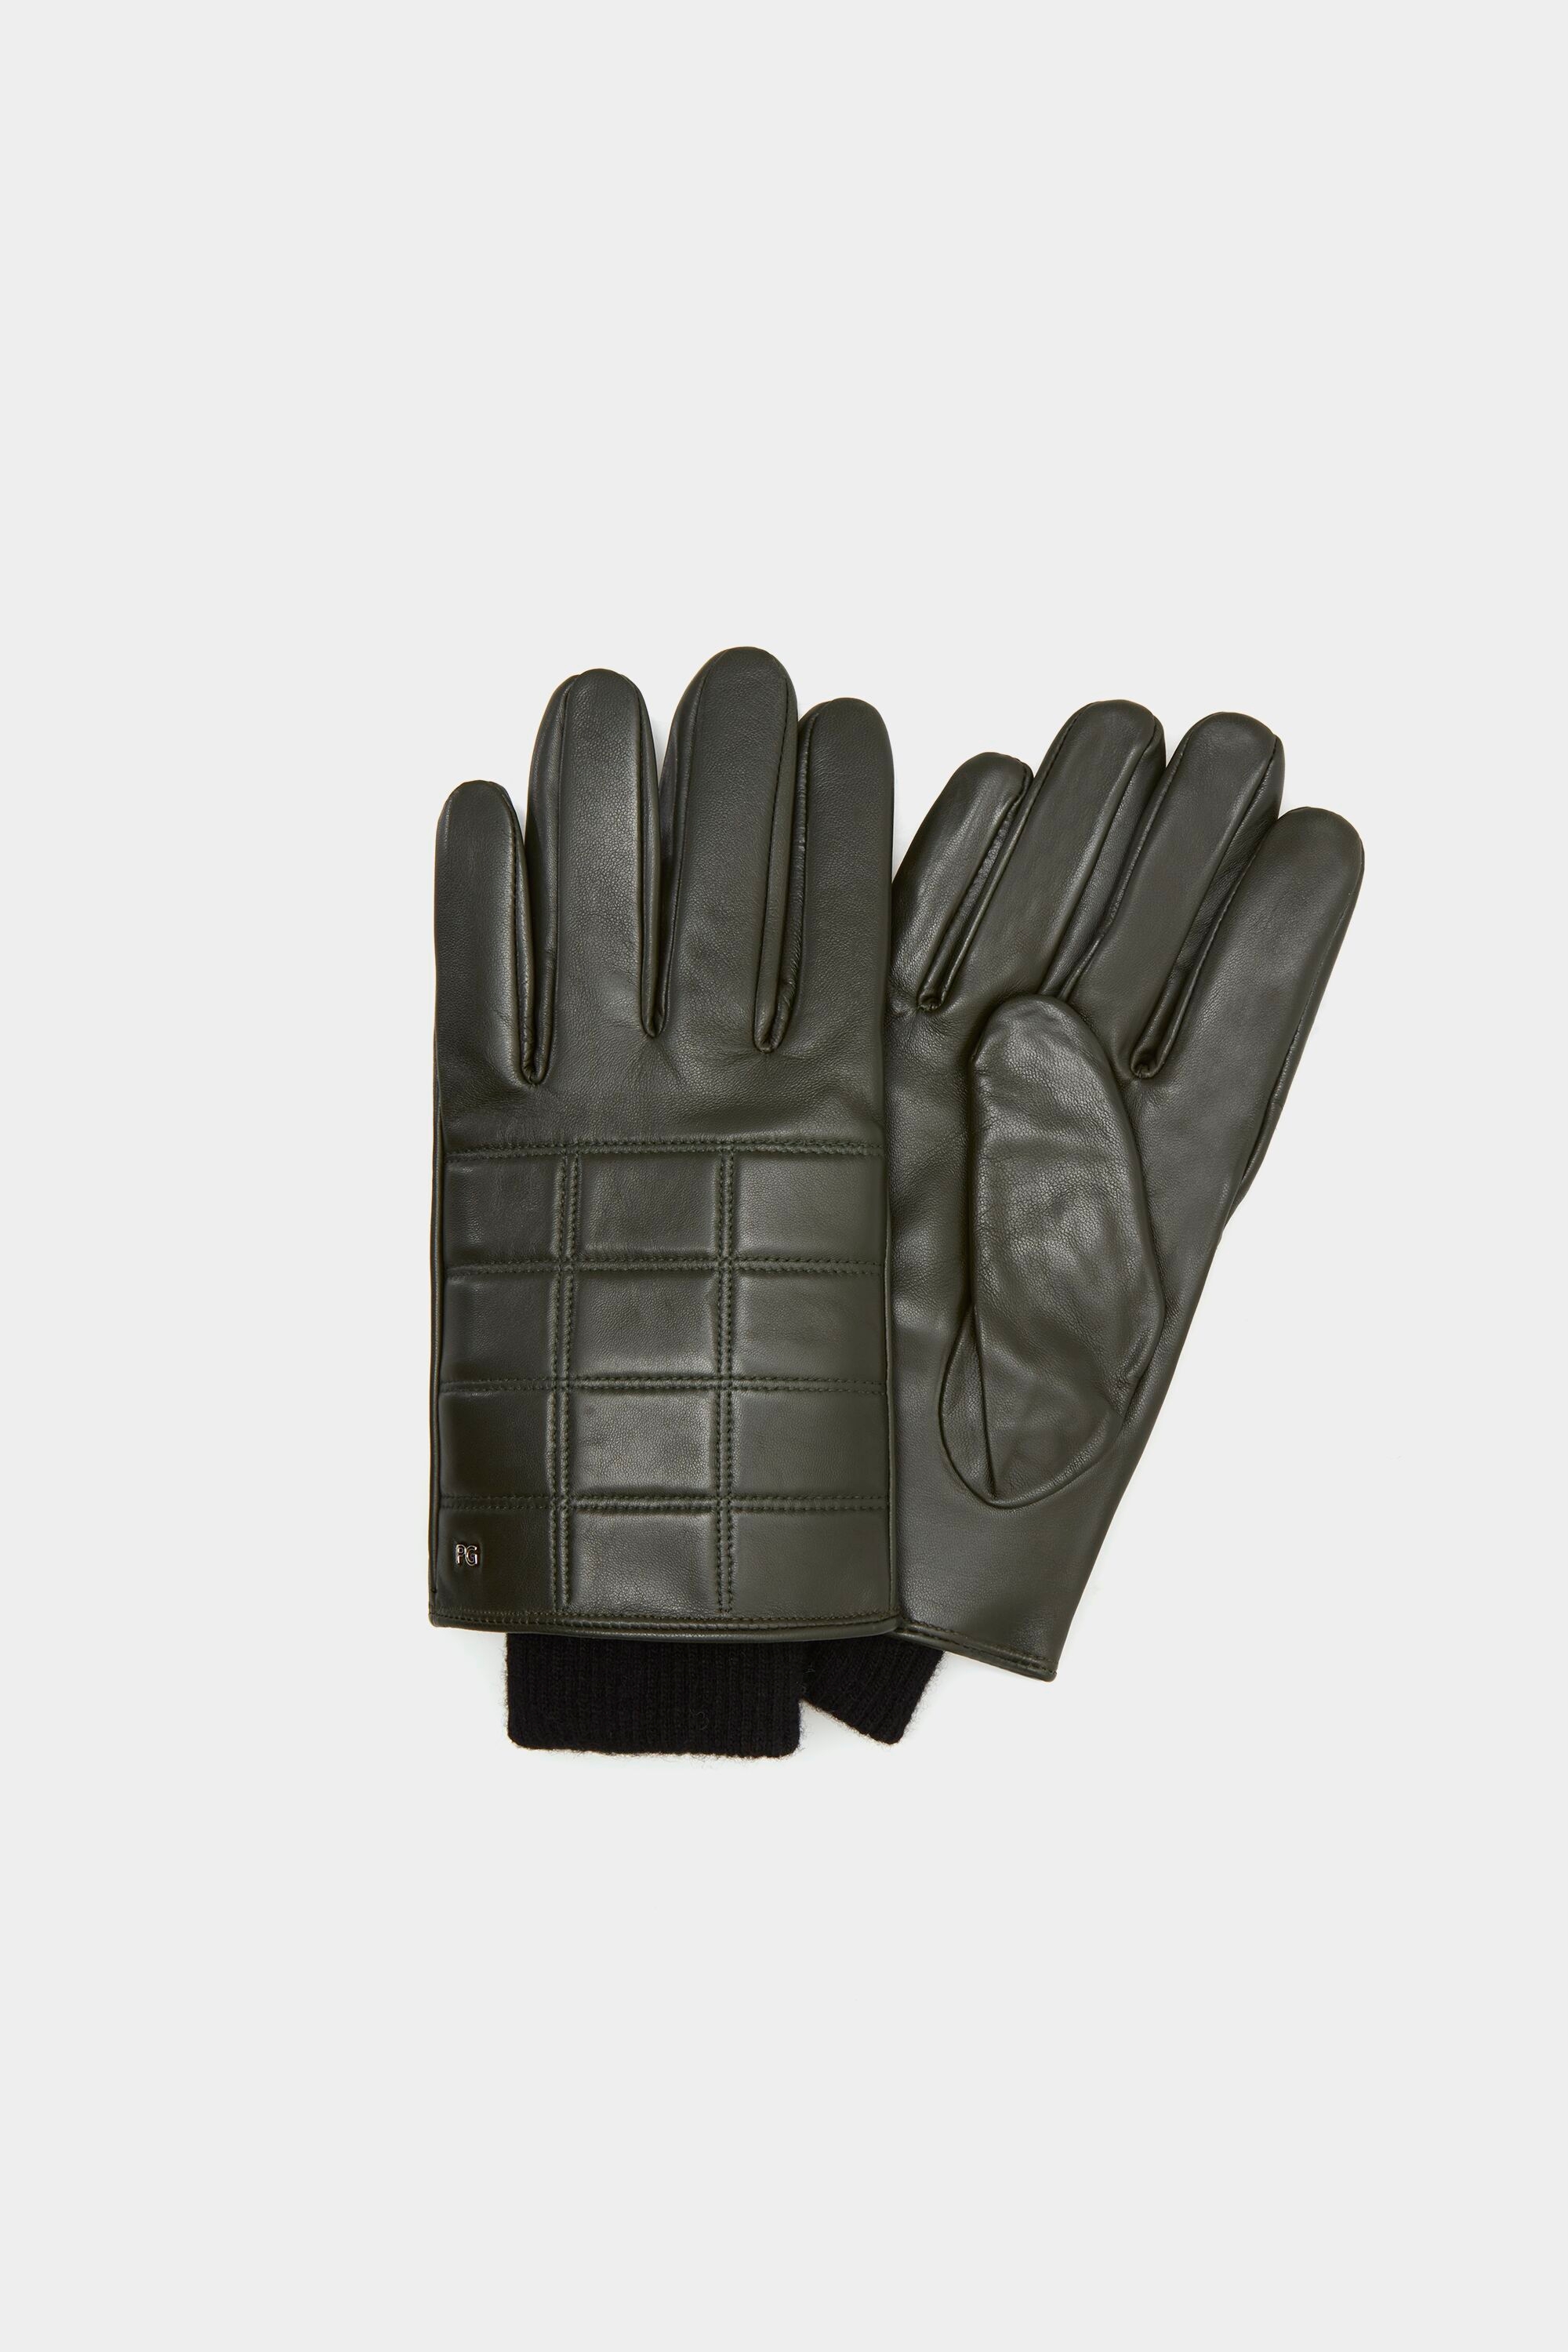 Choco PG leather gloves